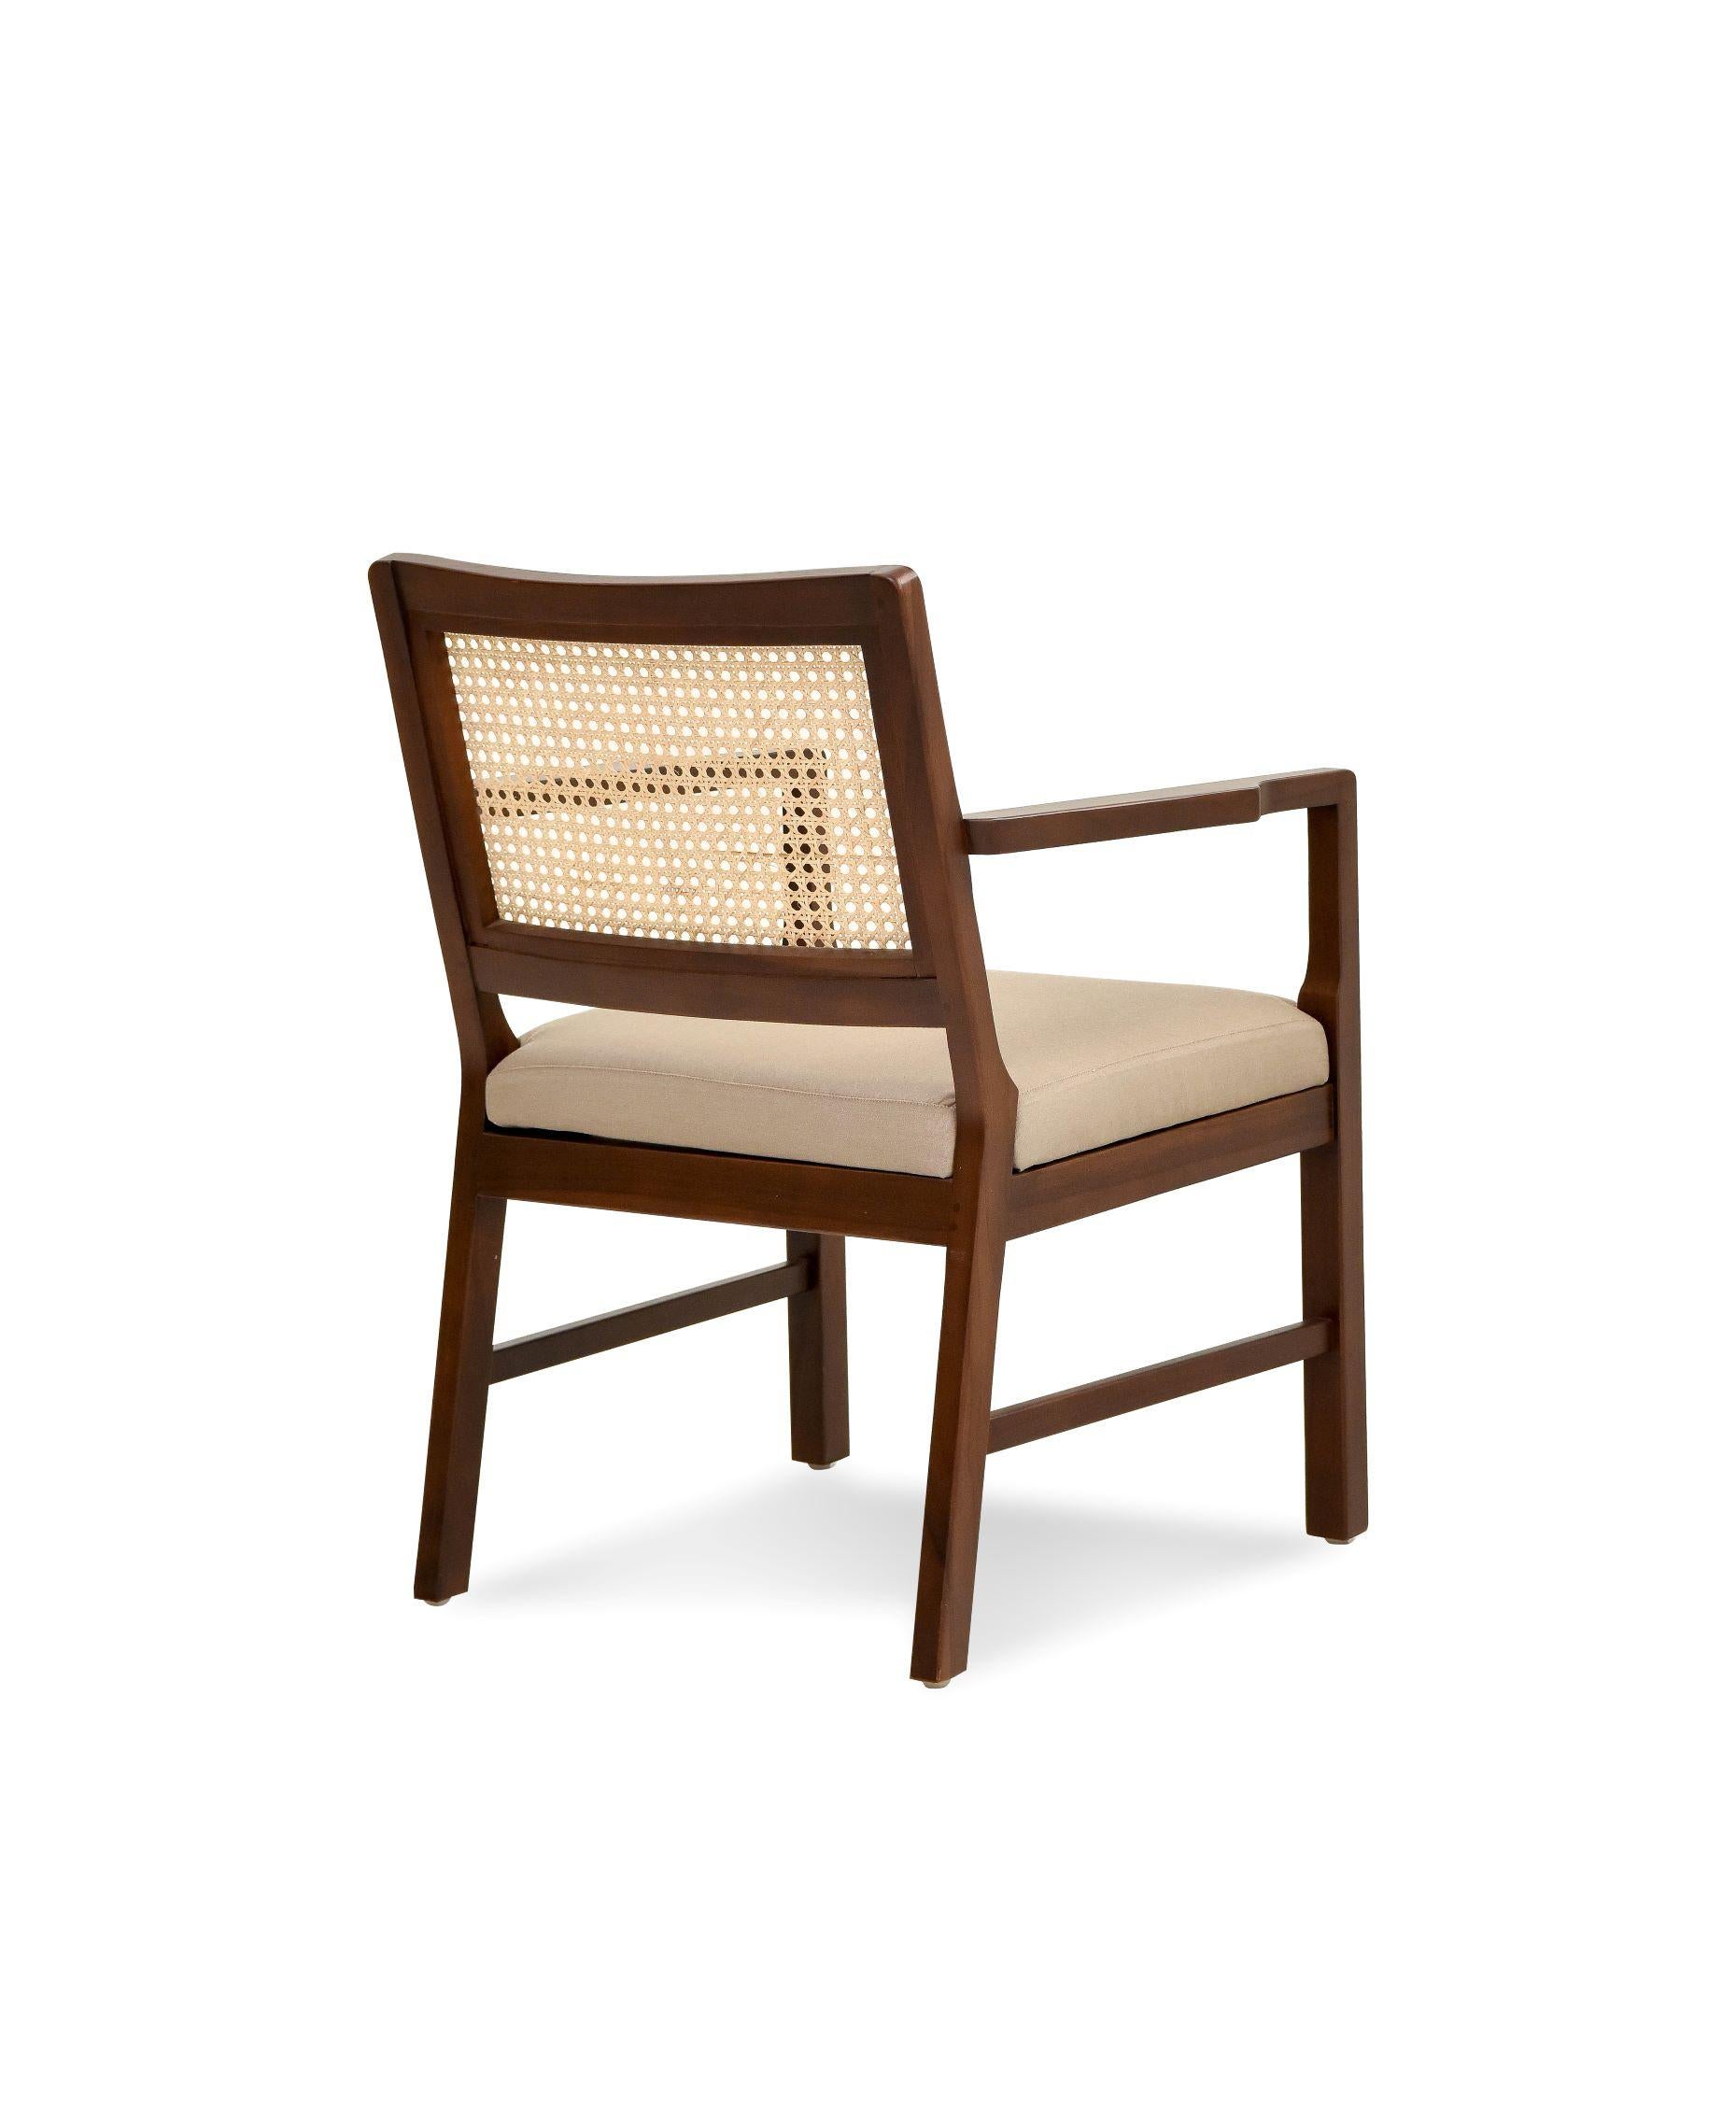 Contemporary Teak Armchair with Woven Cane Back in a Walnut Finish For Sale